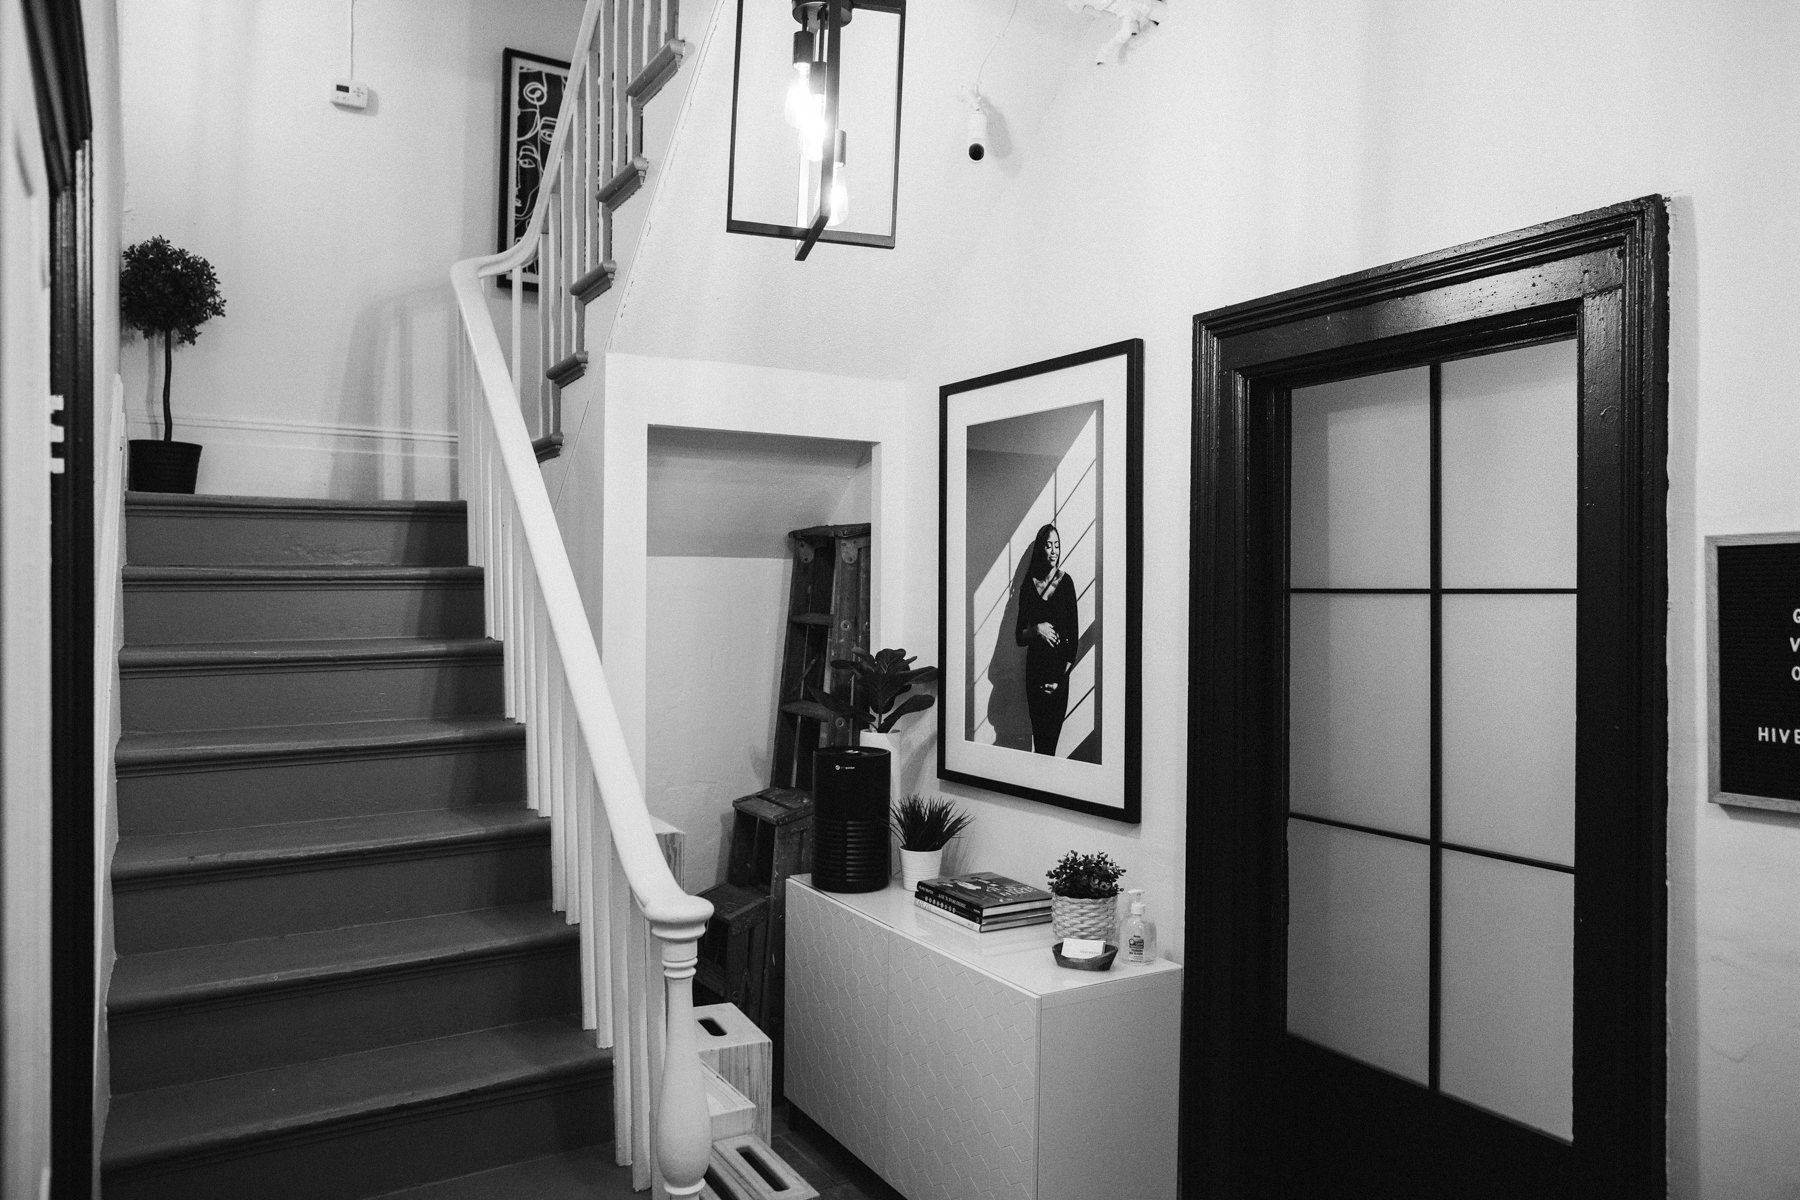 This is the lobby area with stairs and a doorway. It features some studio props and large portrait wall art on display.